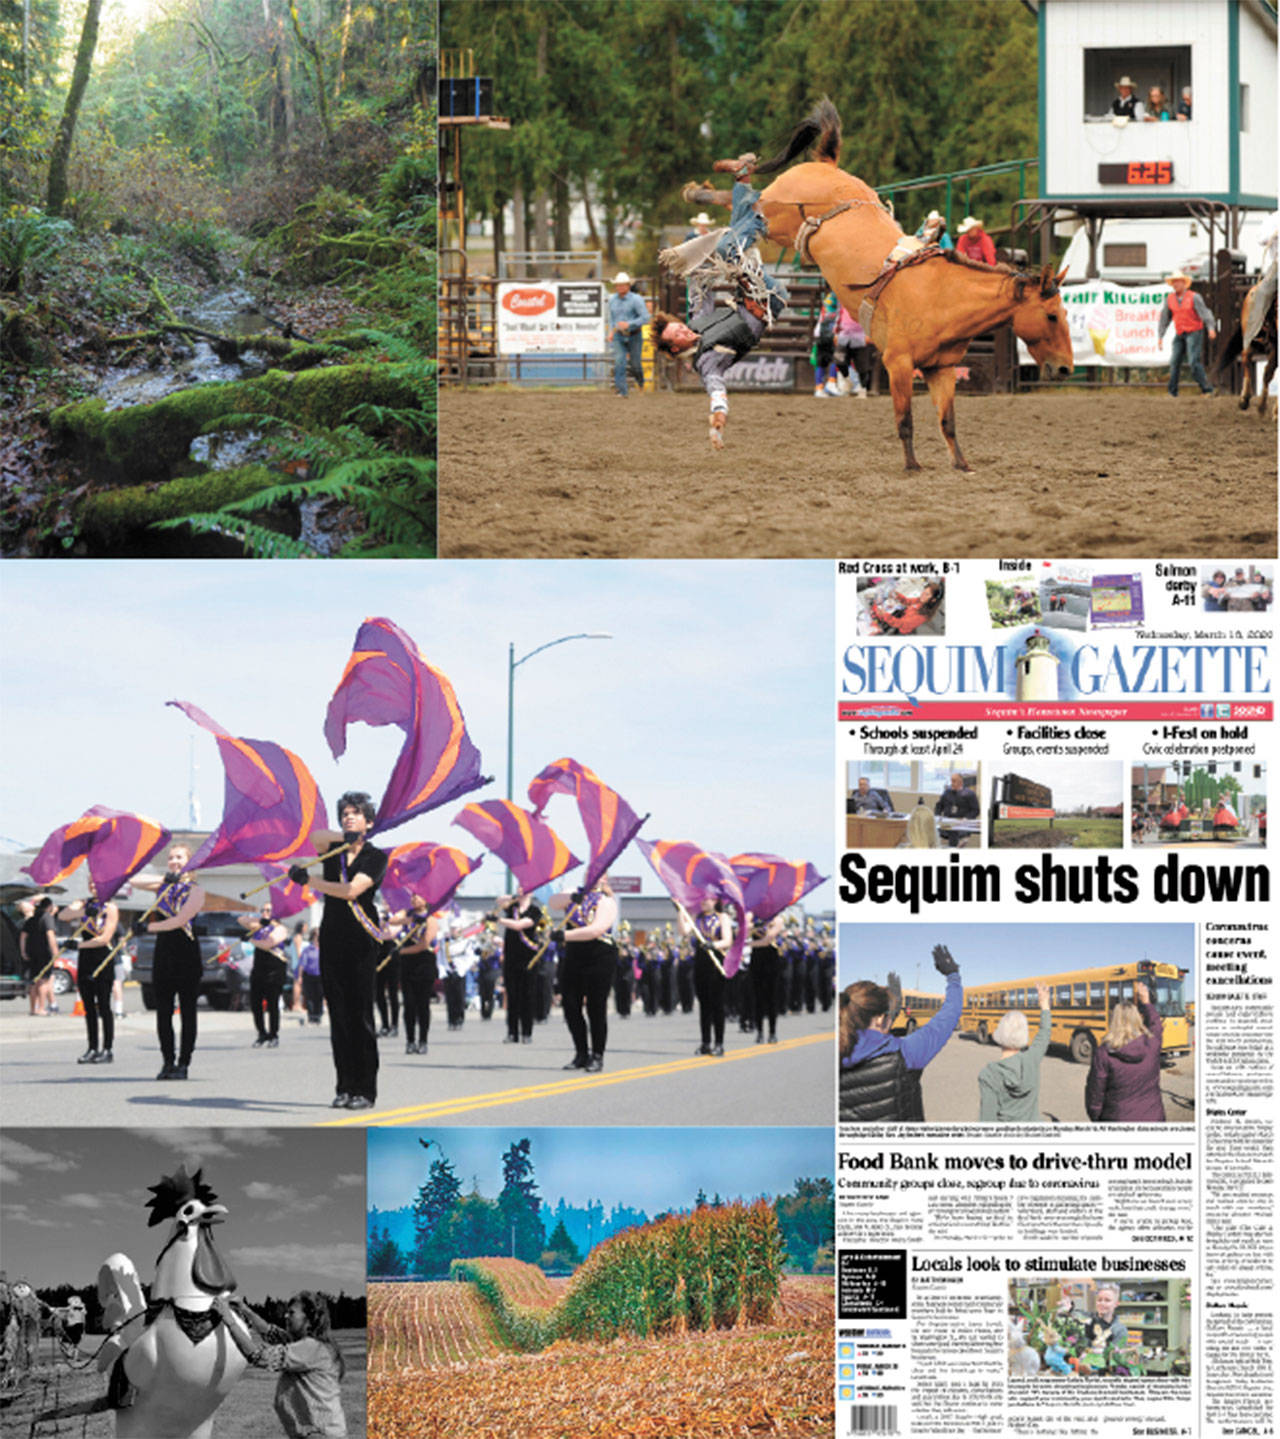 Among the Sequim Gazette’s award-winning entries in the Washington Newspaper Publisher’s Association 2020 Better Newspaper Contest are (clockwise from top left) Sequim Gazette editor Michael Dashiell’s photo of a yet-unnamed creek in Blyn (third place, Color Pictorial Photo division); Gazette reporter Matthew Nash’s photo of Cooper Wicks competing in the bareback riding division at the Clallam County Fair Rodeo in August 2019 (second place, Color Sports Action Photo division); the Gazette’s March 18, 2020, page A-1 (first place, Front Page Design); contributor Bob Lampert’s photo of corn rows near Sequim-Dungeness Way in October 2019 (second third place, Color Pictorial Photo division); Nash;s photo of the Bekkevar Family Farm’s rooster ride in summer 2019 (second place, Feature-Portrait-Pictorial, Black and White division), and Dashiell’s photo of the Sumner Marching Band and Flag Team at the Sequim Irrigation Festival Grand Parade in May 2019 (second place, Color Feature Photo division).